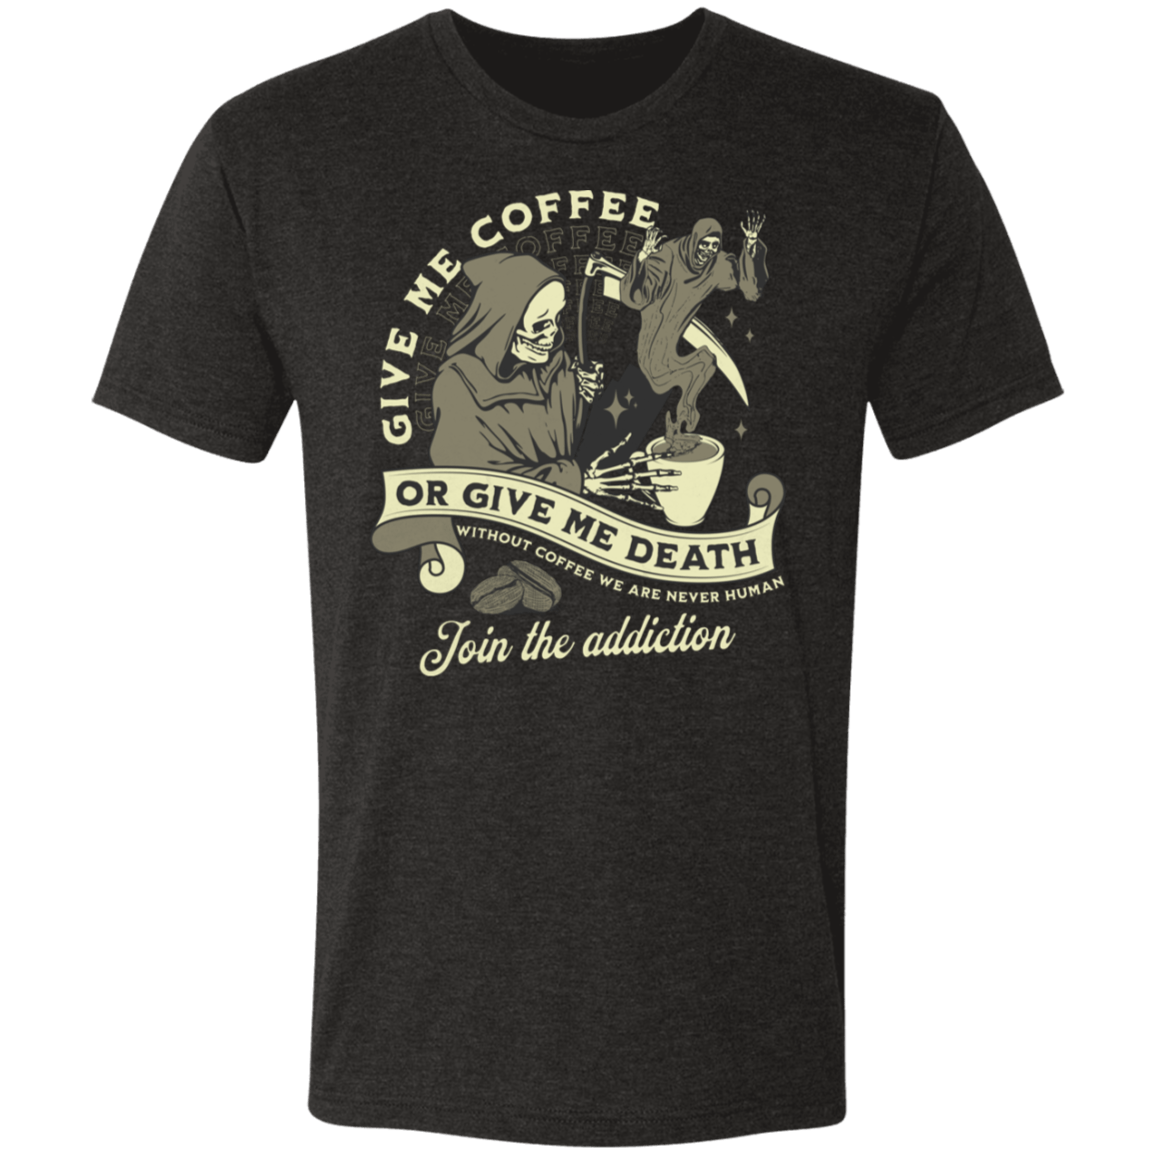 Give Me Coffee Or Death Gym Tee - T-Shirts